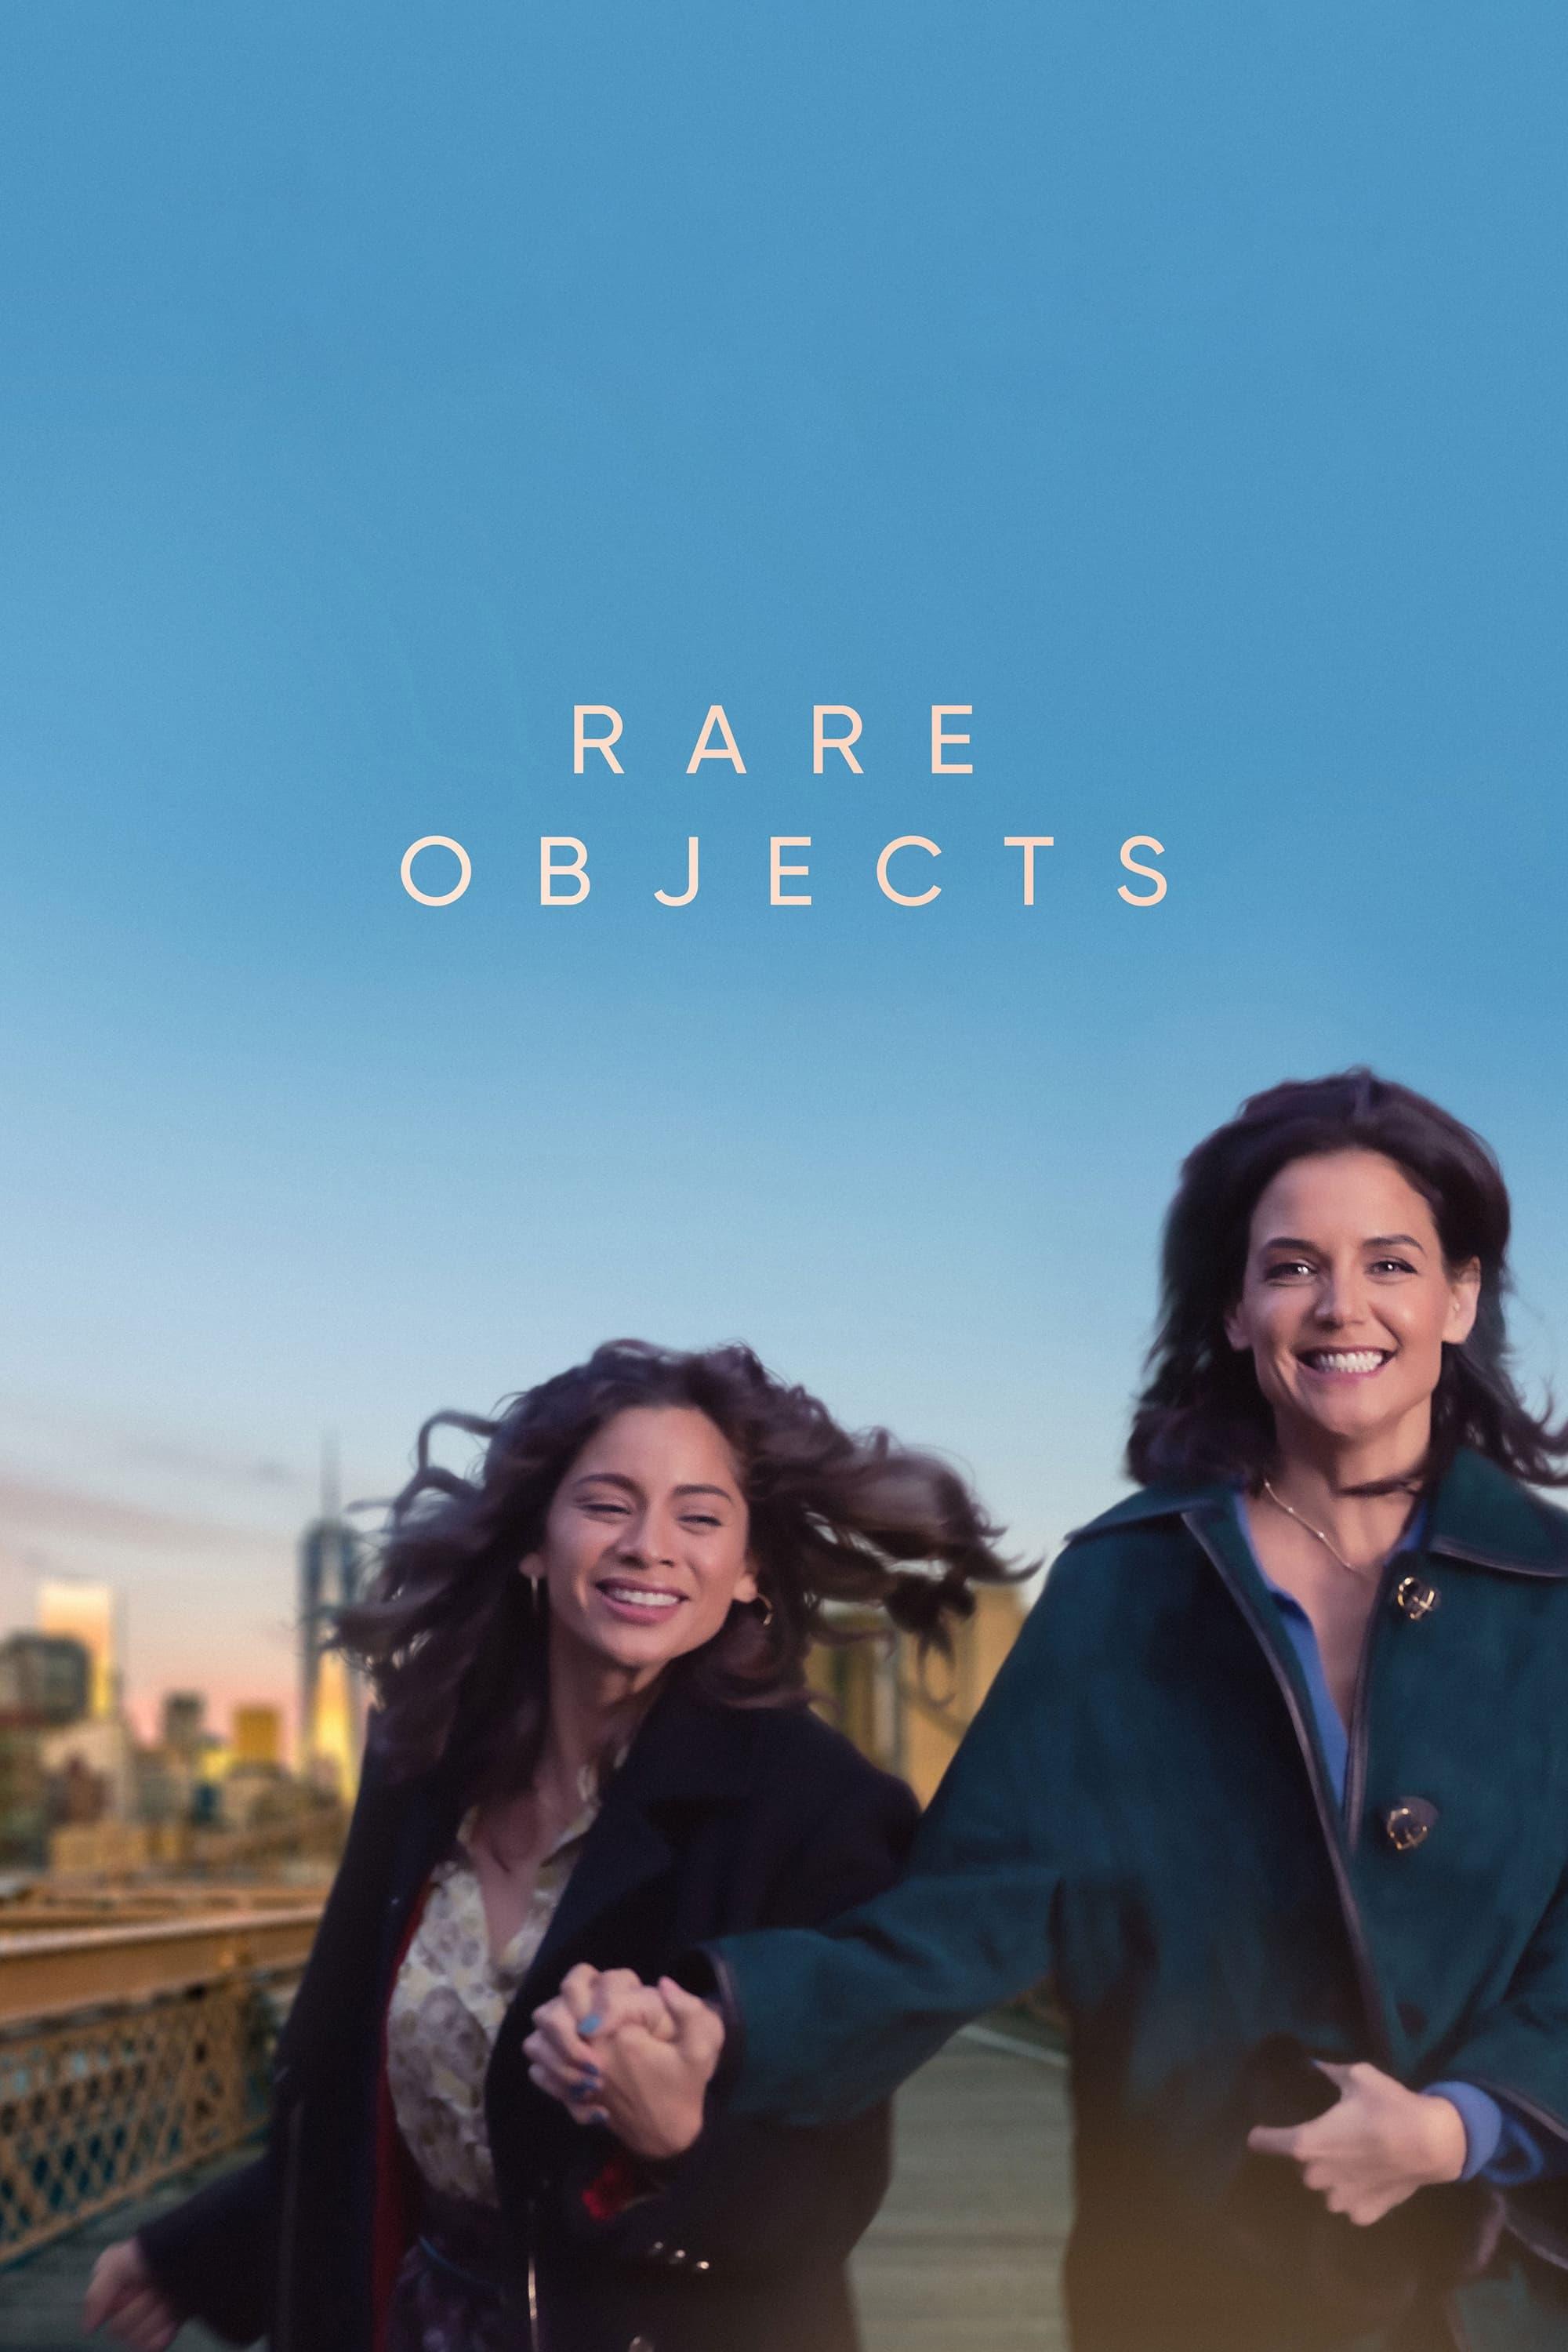 Rare Objects poster